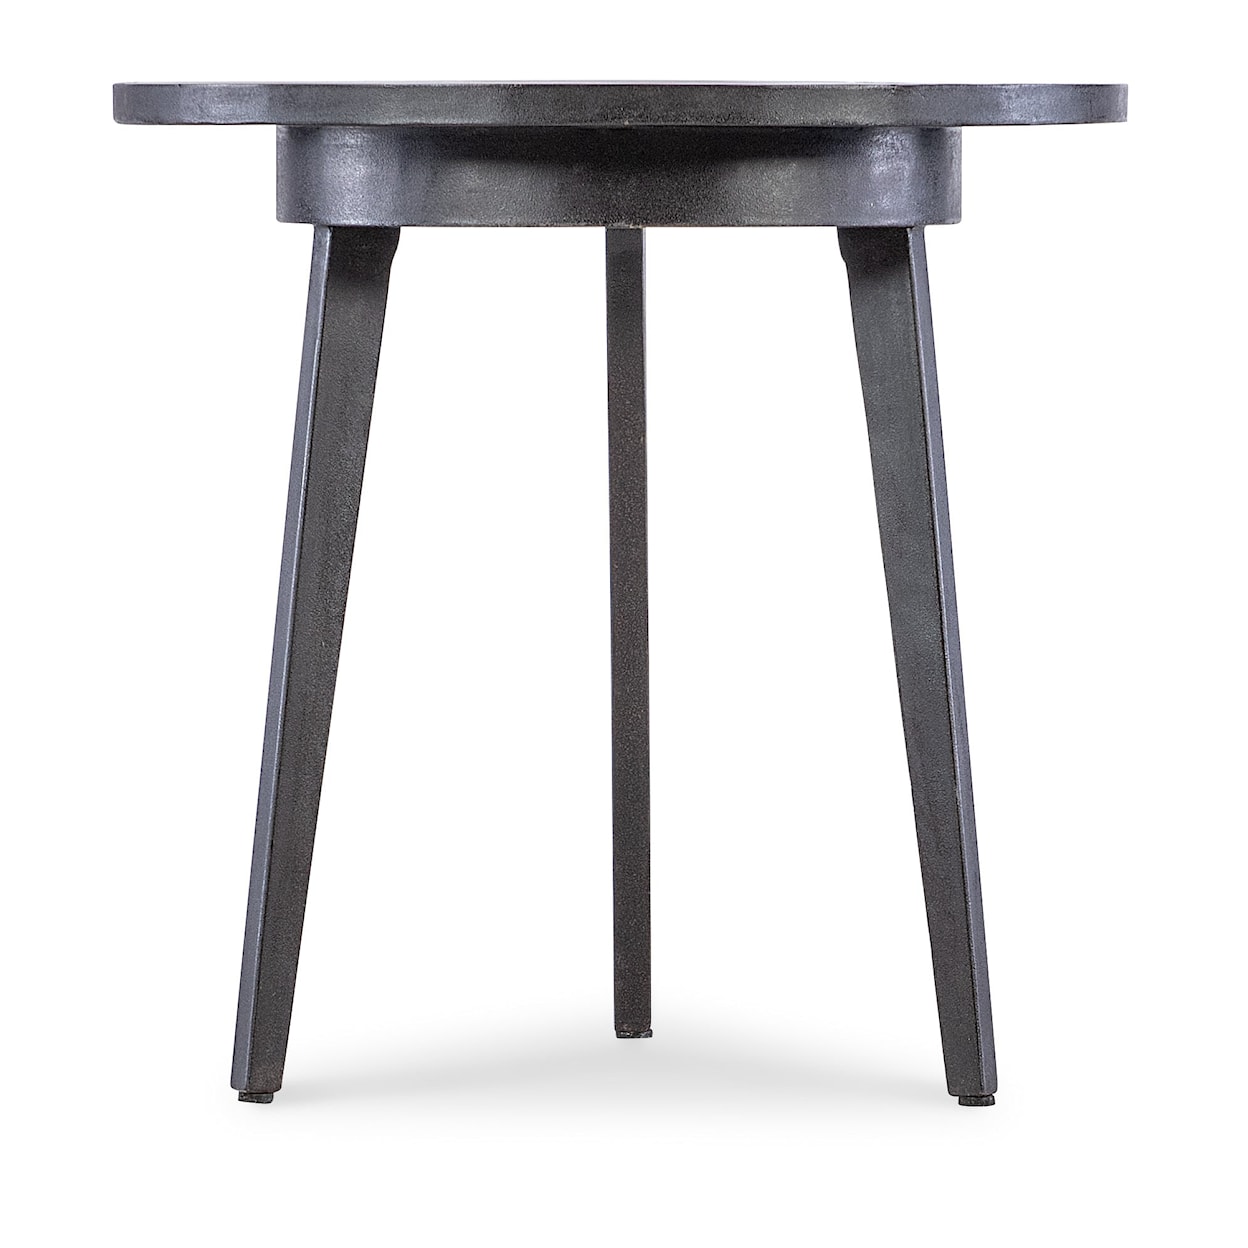 BOBO Intriguing Objects BOBO Intriguing Objects Delilah Round Side Table - Small